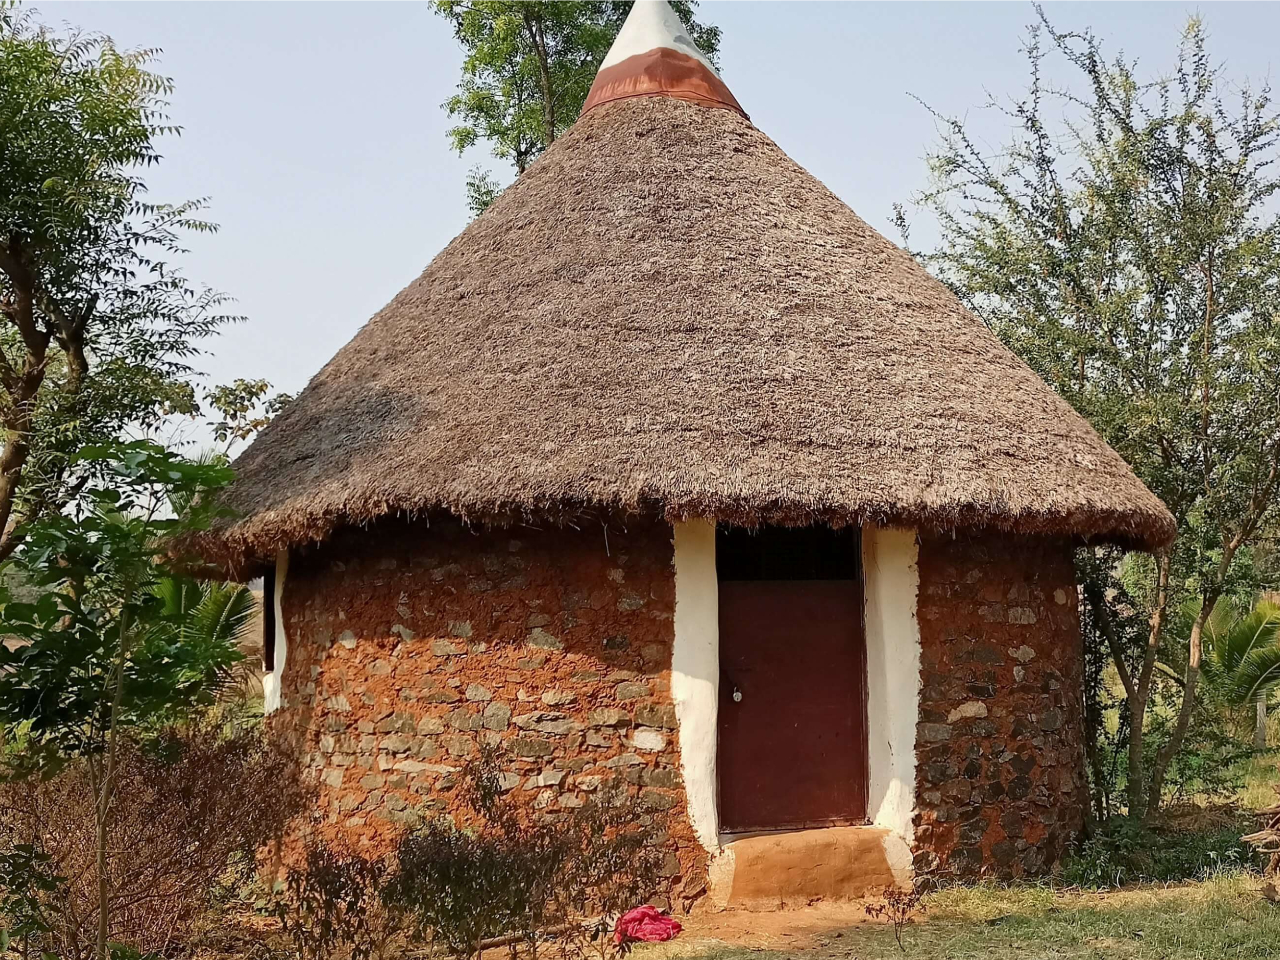 A 16 feet diameter round hut with stone and cob walls and local rough wood and thatch roof, no belt beam, mud flooring, metal door and window-  Total area 200 square feet; total cost Rs 150000/-